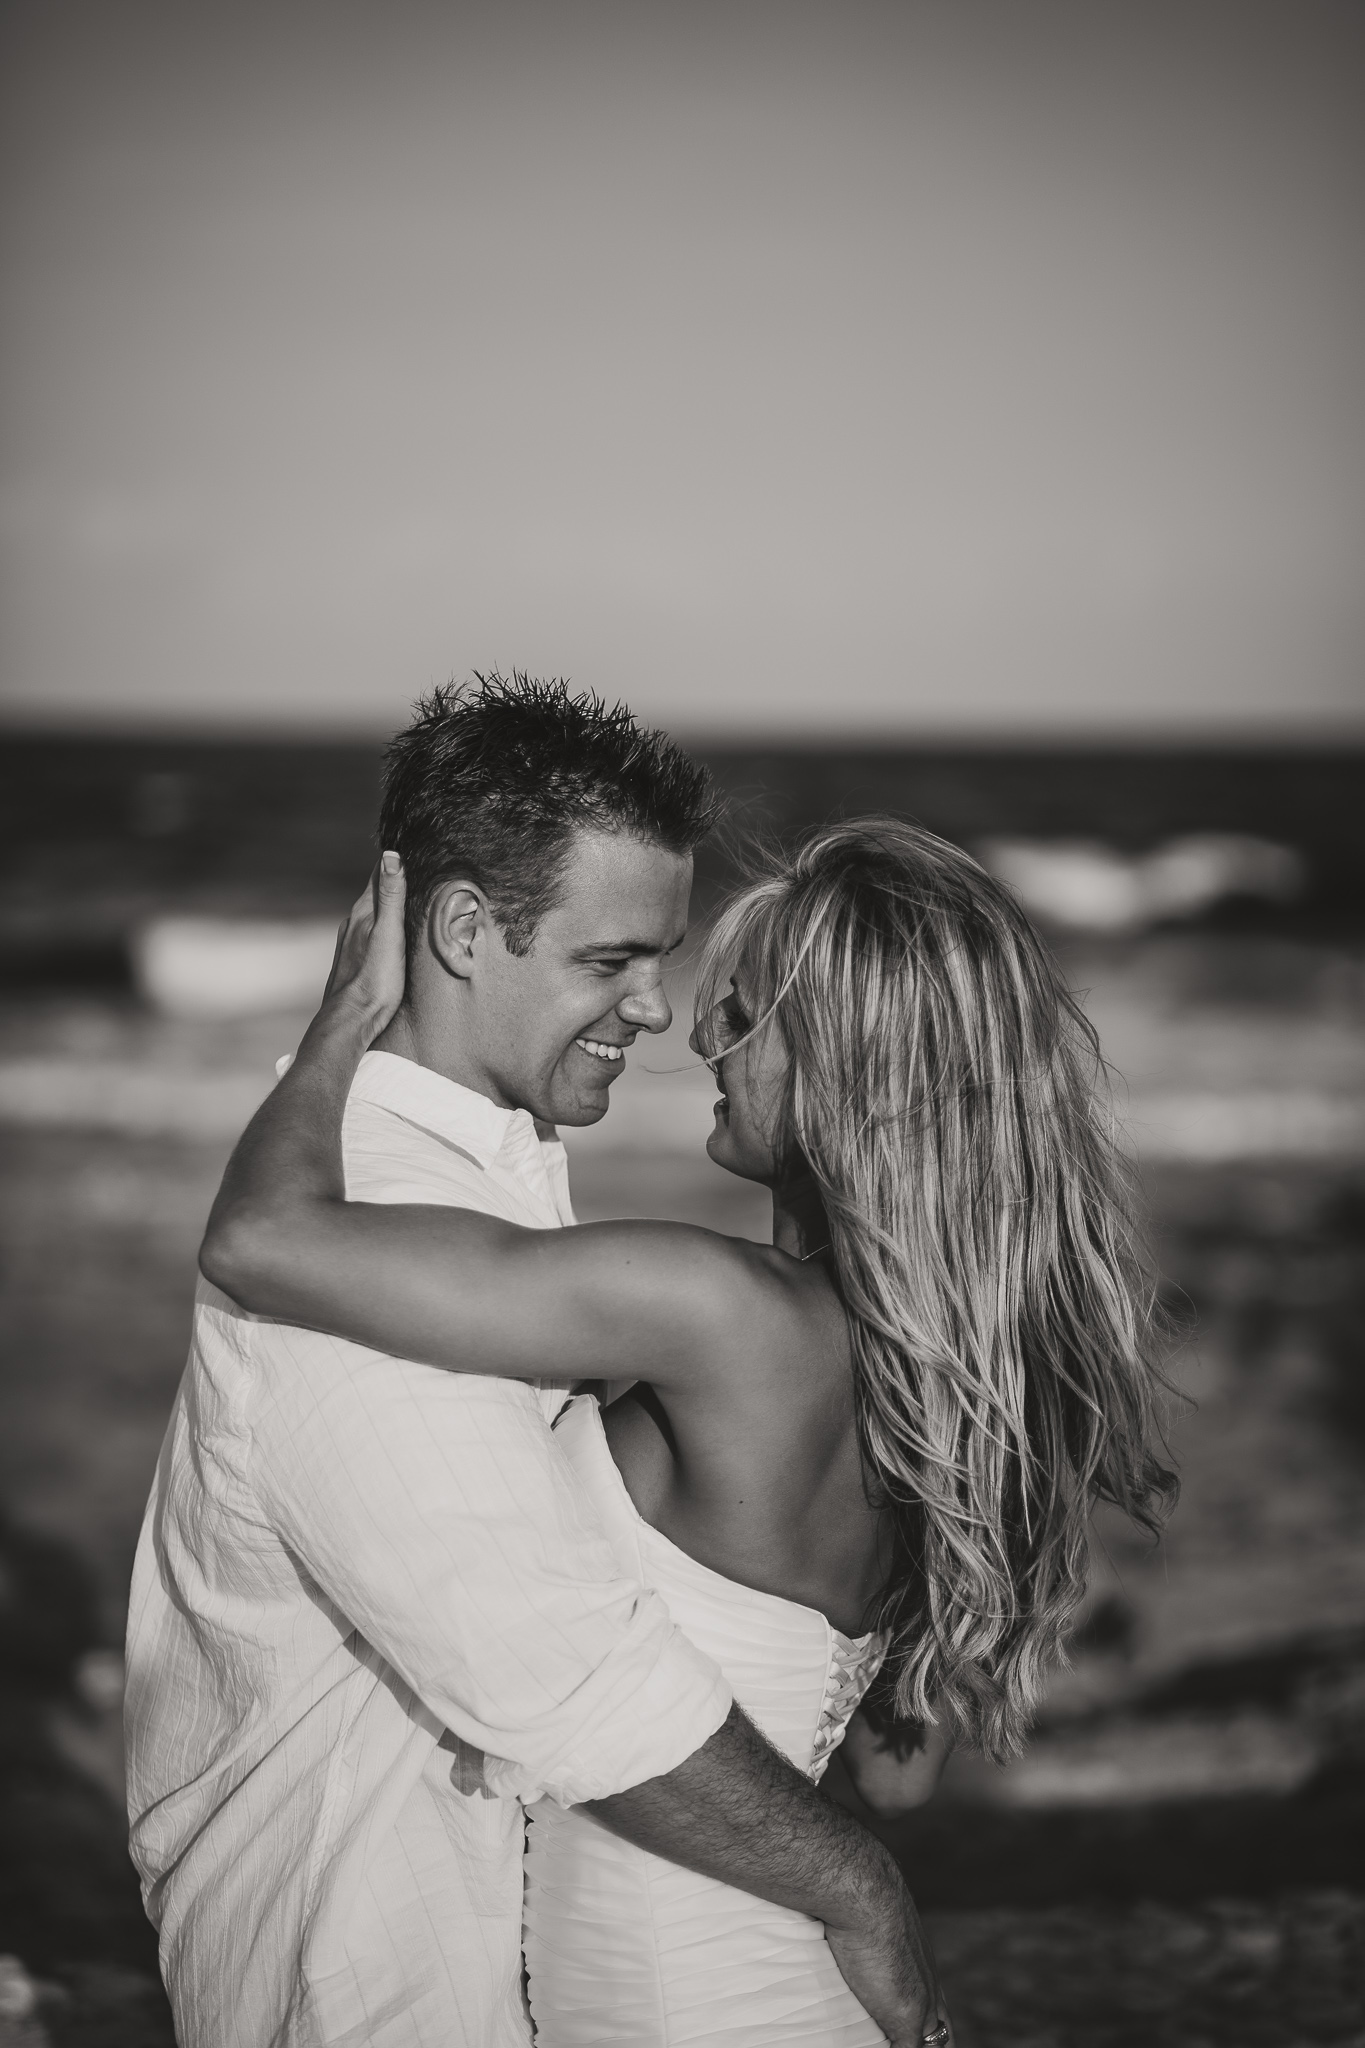 black and white picture of a couple embracing